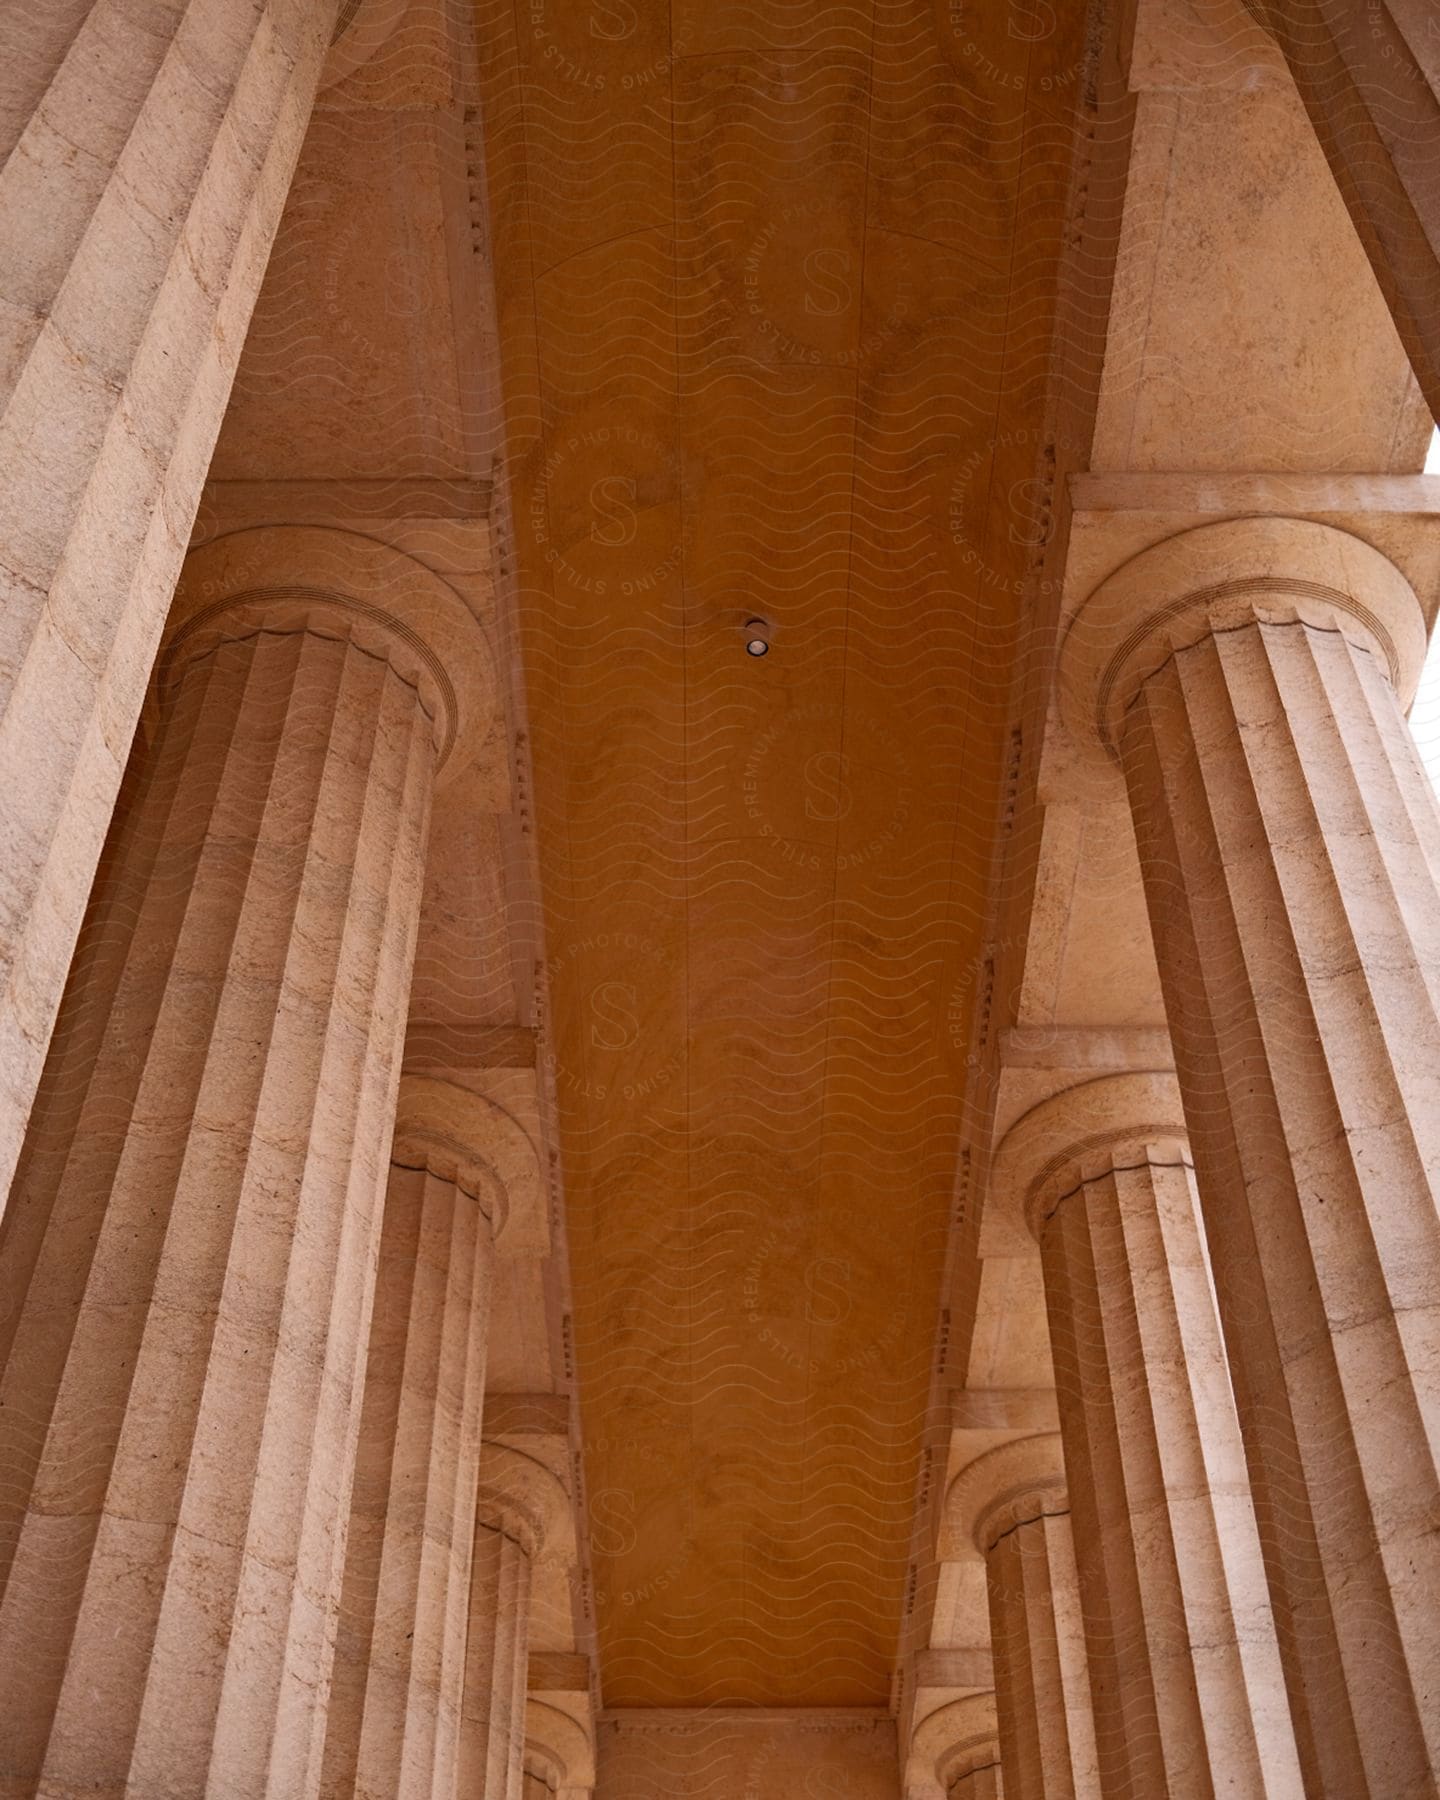 A concrete building contains large columns and a curved ceiling.